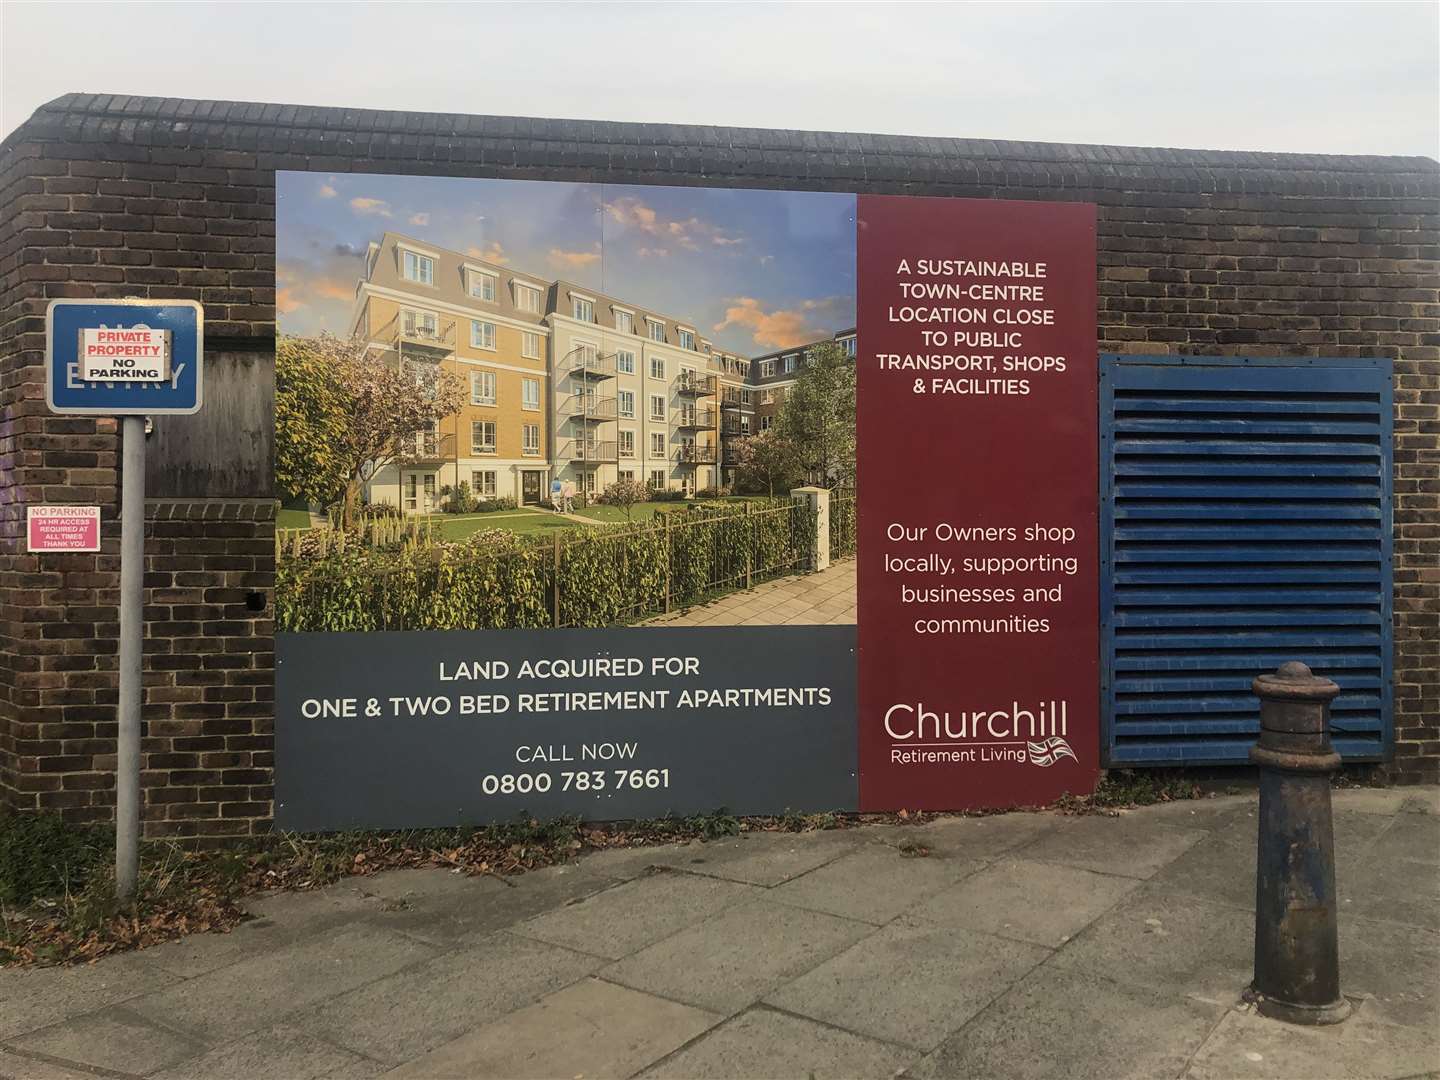 Gravesham Borough Council's planning committee voted unanimously to grant planning permission to Churchill Retirement Living